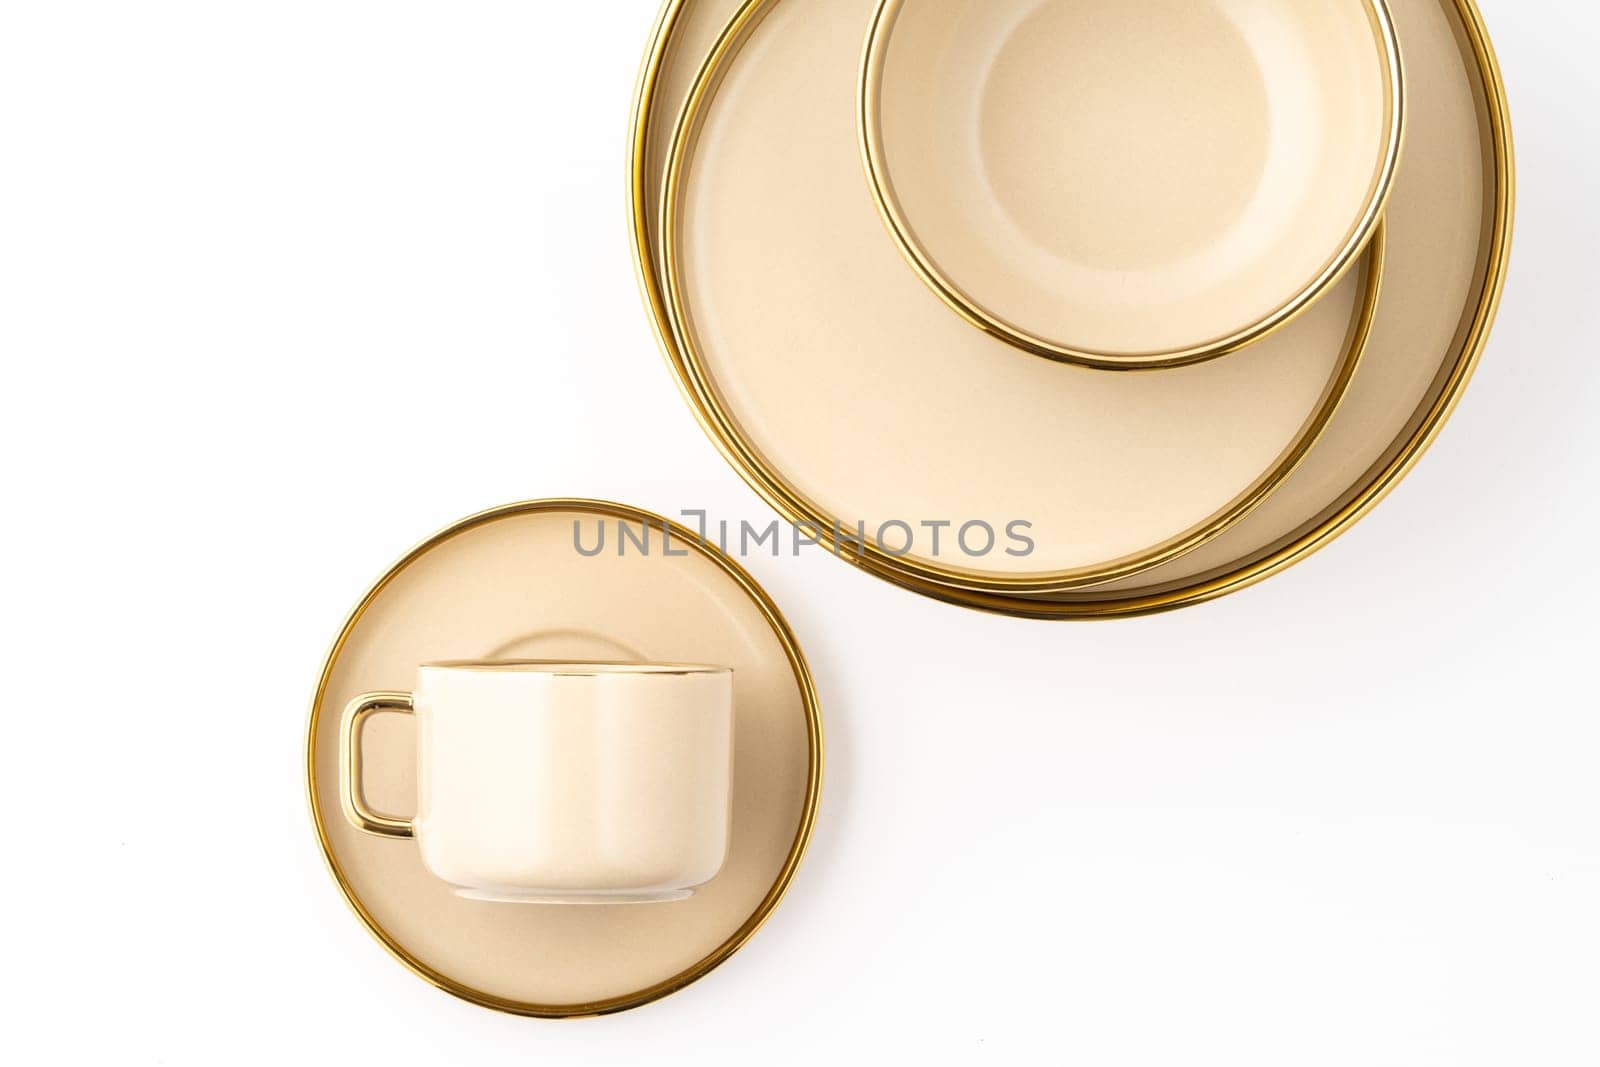 A Set of light brown ceramic plate and cup on a white background. Top view